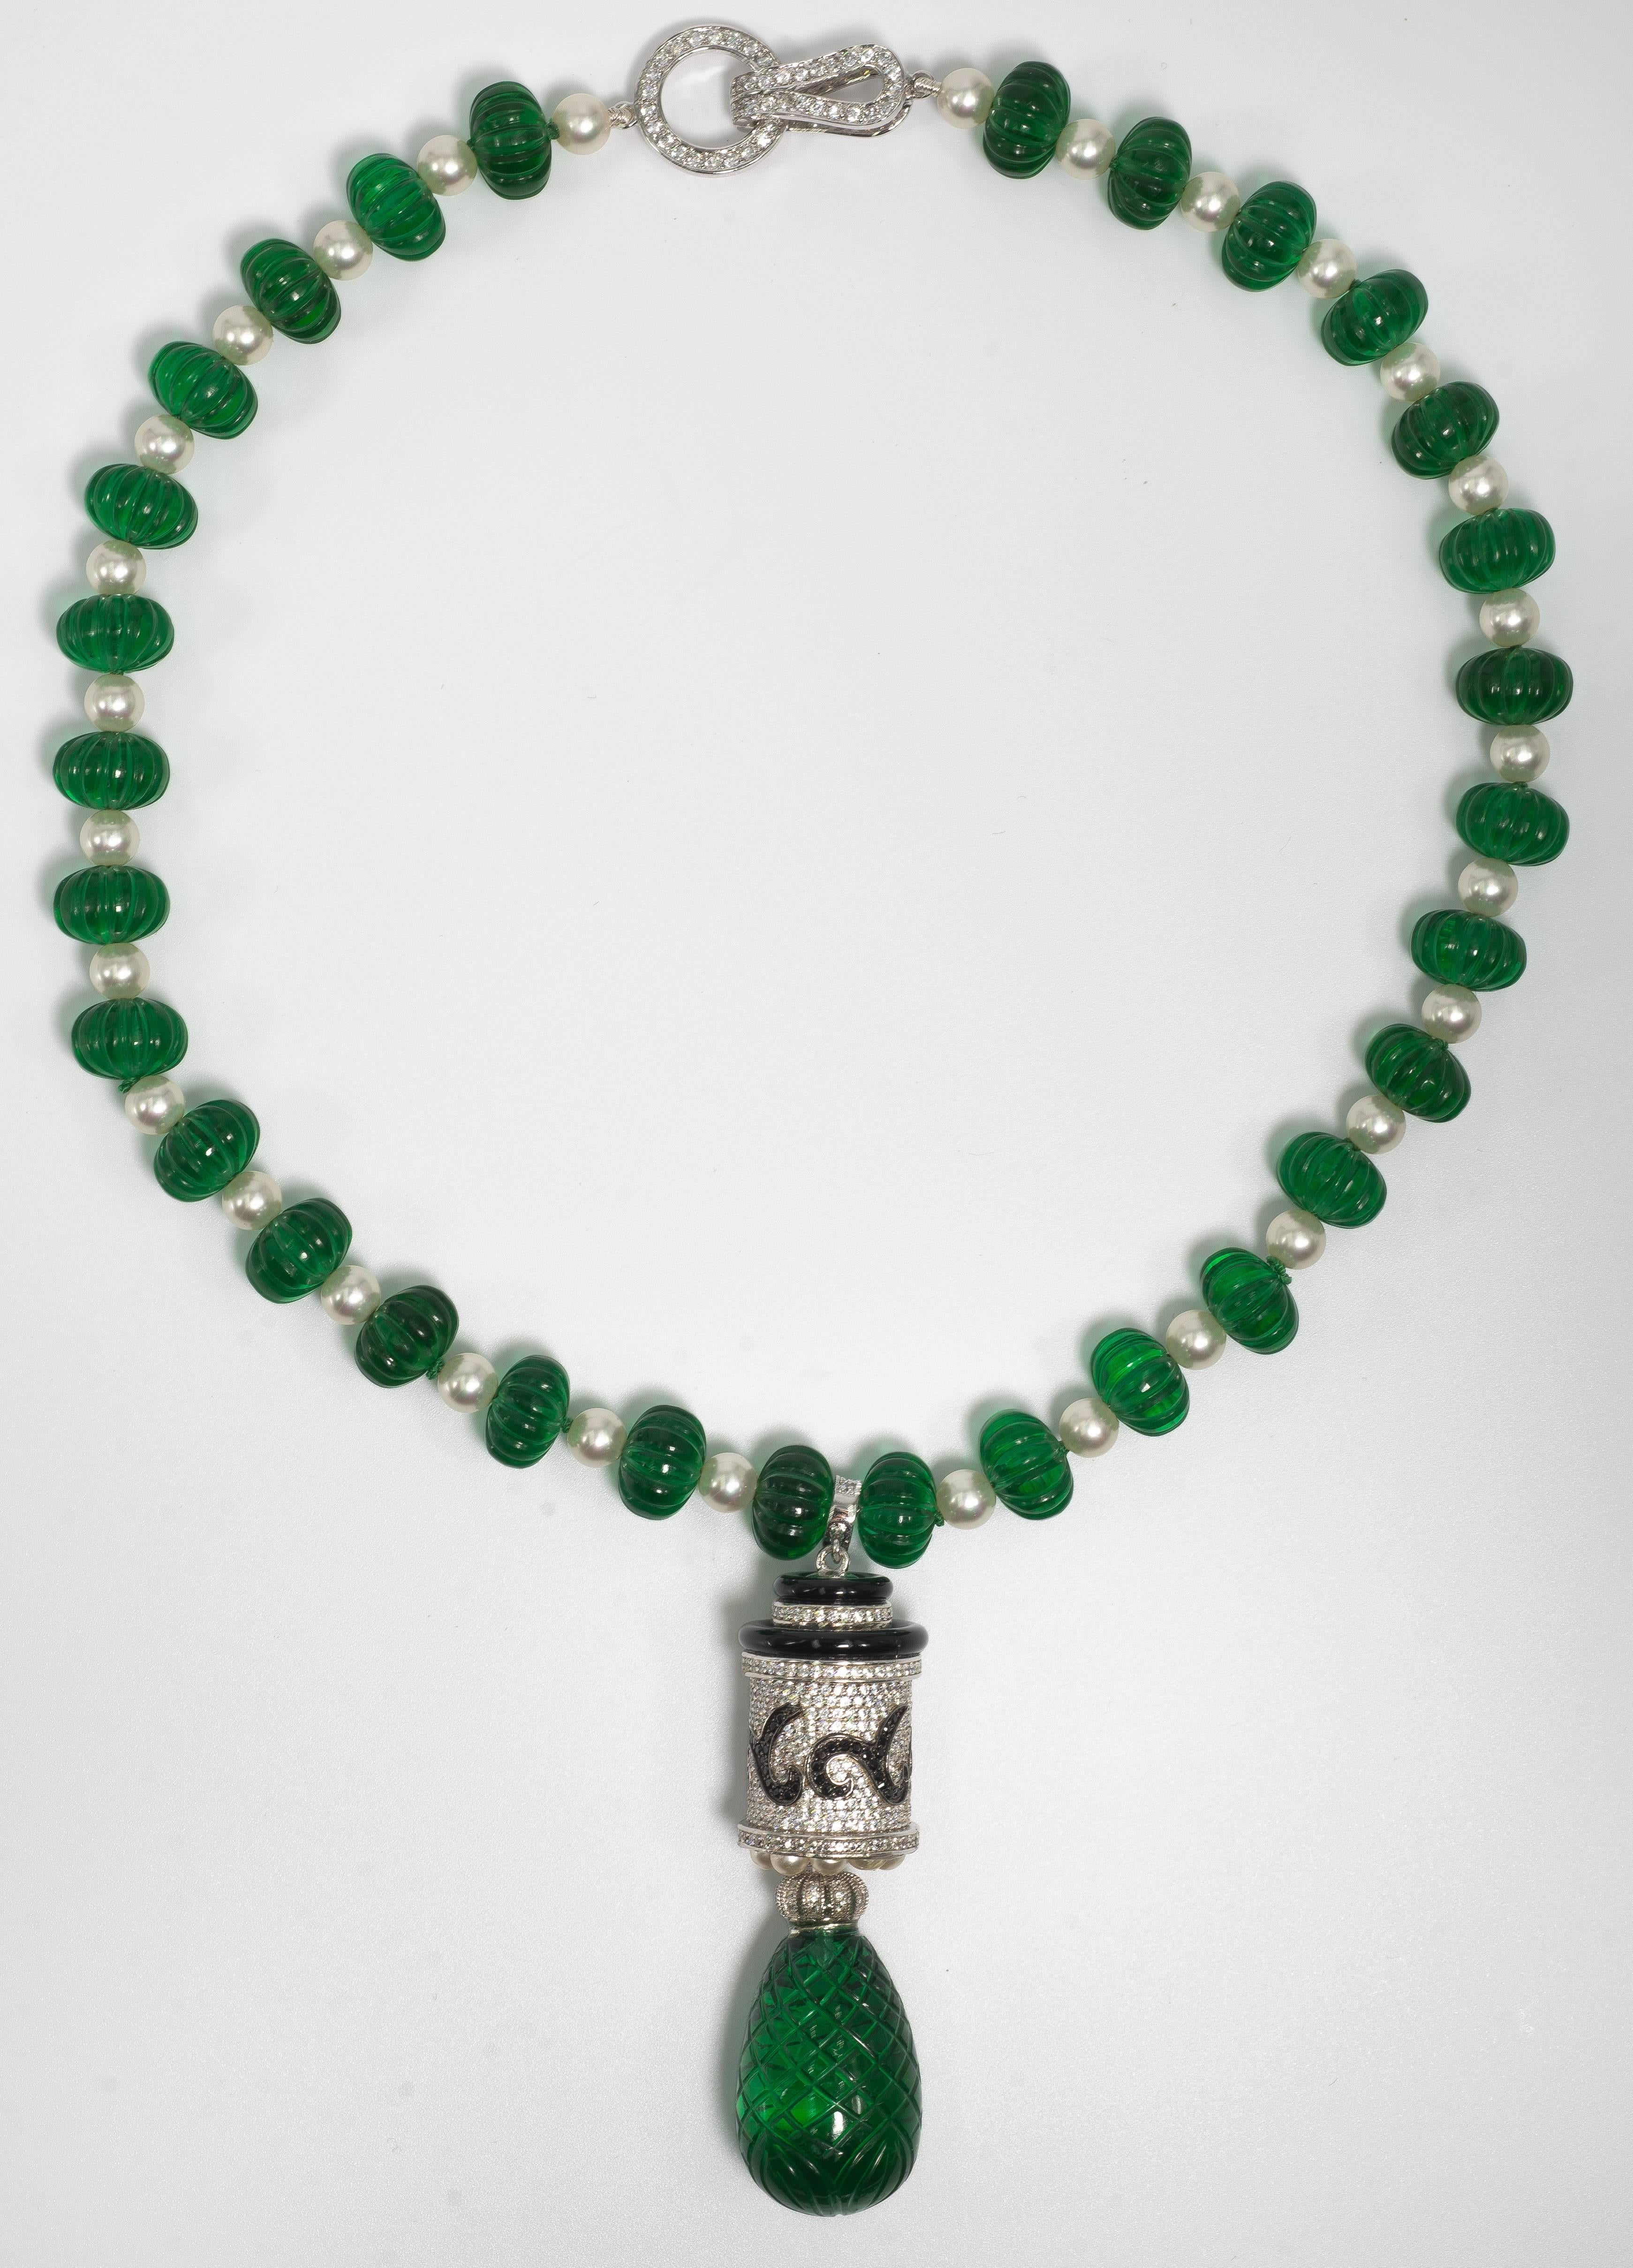 Fabulous Maharajah Jewel Collection carved faux emerald bead diamond necklace made of a strand of hand carved faux emerald beads measuring 16mm  to 12mm each bead interspaced with pearls suspending an Art Deco style faux white and black